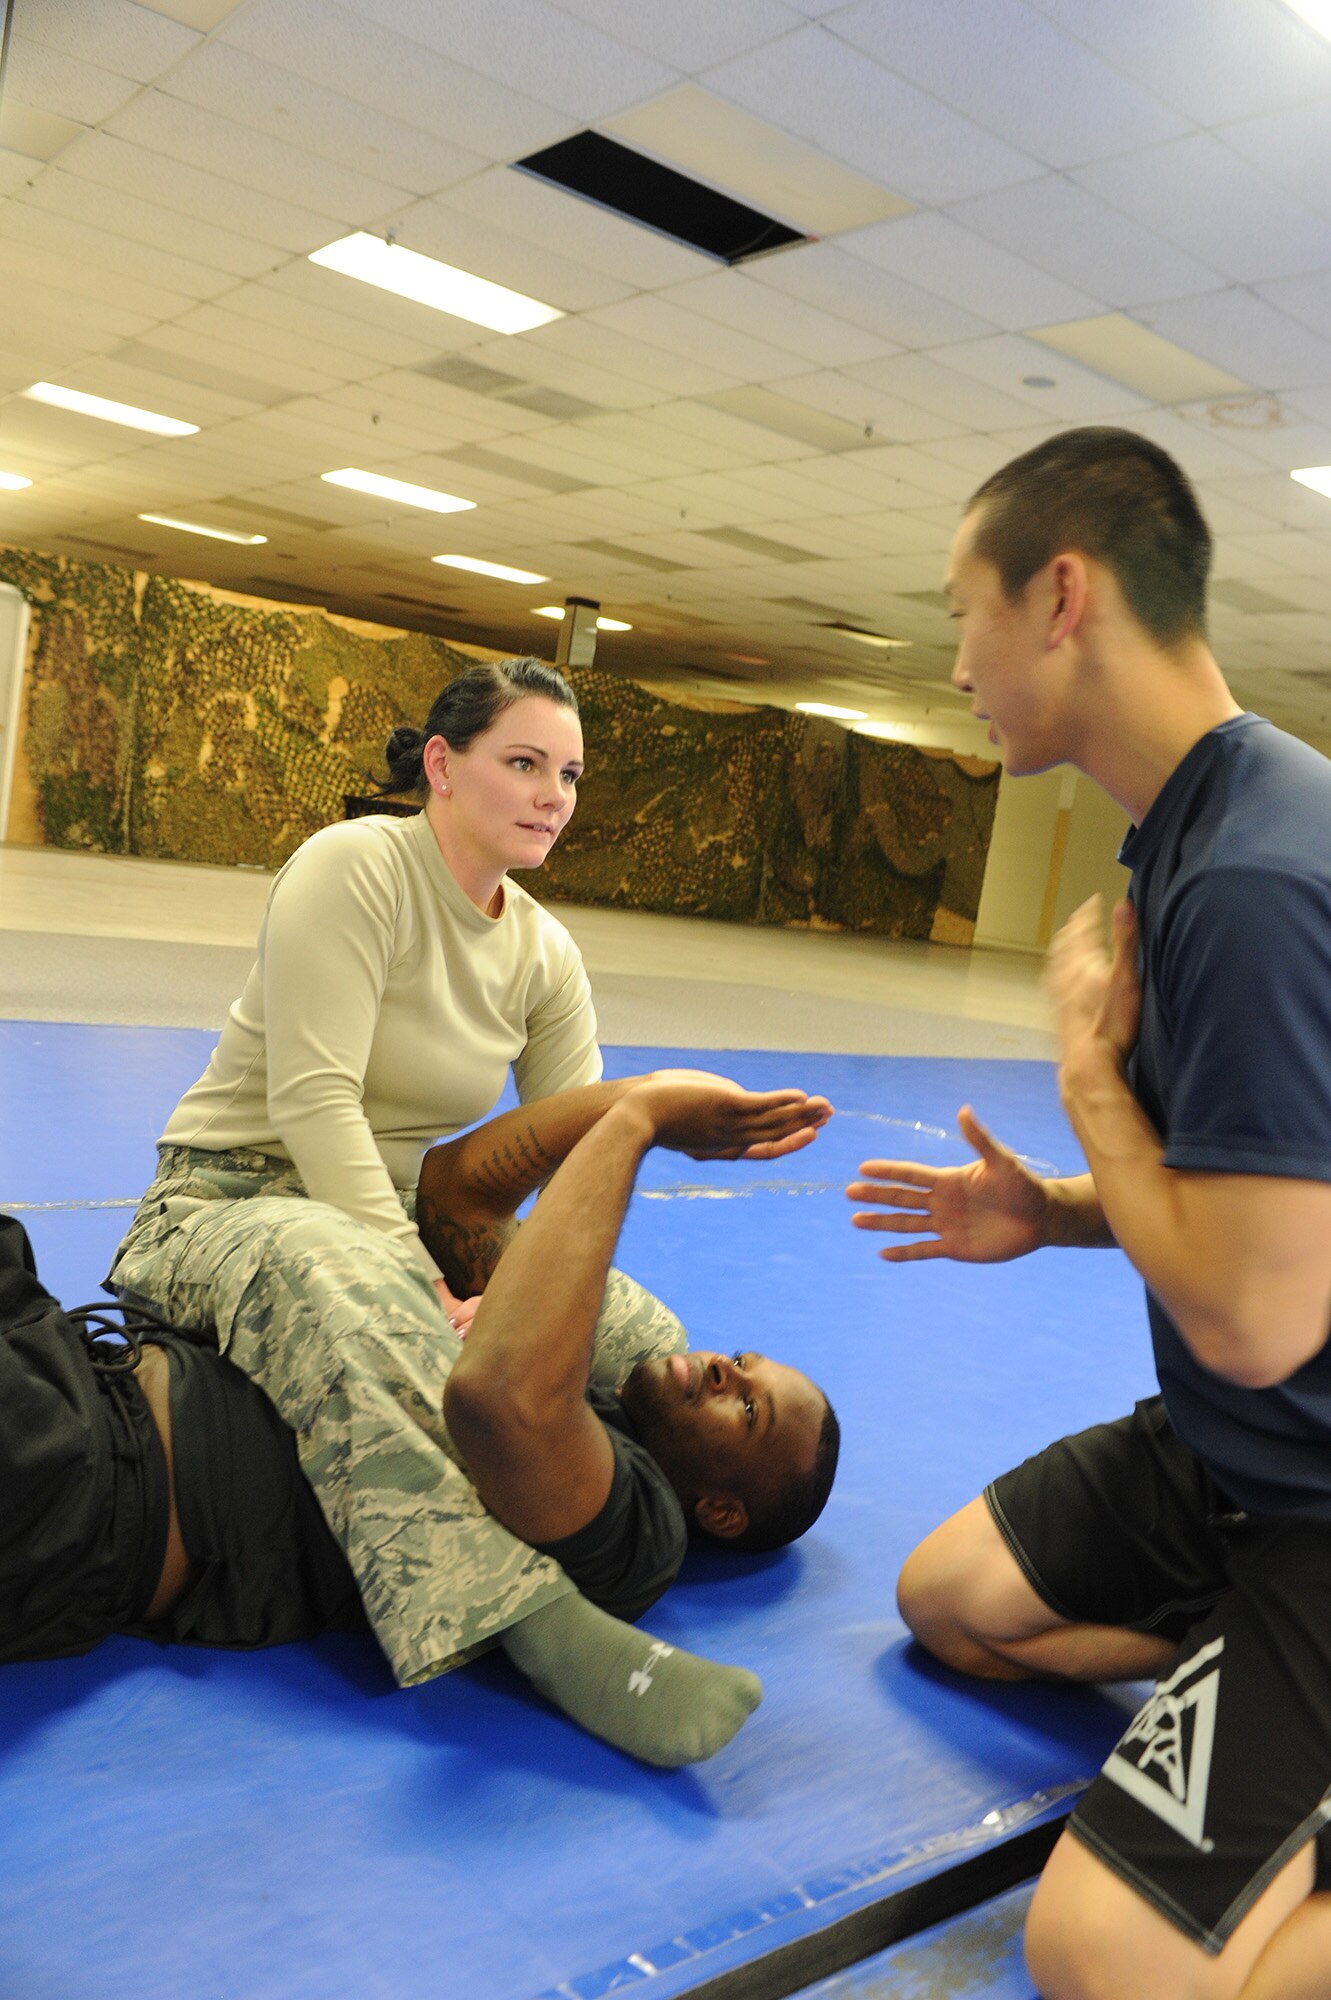 Senior Airman James Hong, 5th Communications Squadron cyber systems operator, instructs Airman 1st Class Laura McDuffie, 5th CS cyber transport technician, on the arm bar technique during Jiu Jitsu training at Minot Air Force Base, N.D., Oct. 22. McDuffie applies skills she learned while on her high school wrestling team in Tallahassee, F.L., to her training in the Gracie Jiu Jitsu program. (U.S. Air Force photo/Senior Airman Stephanie Sauberan)